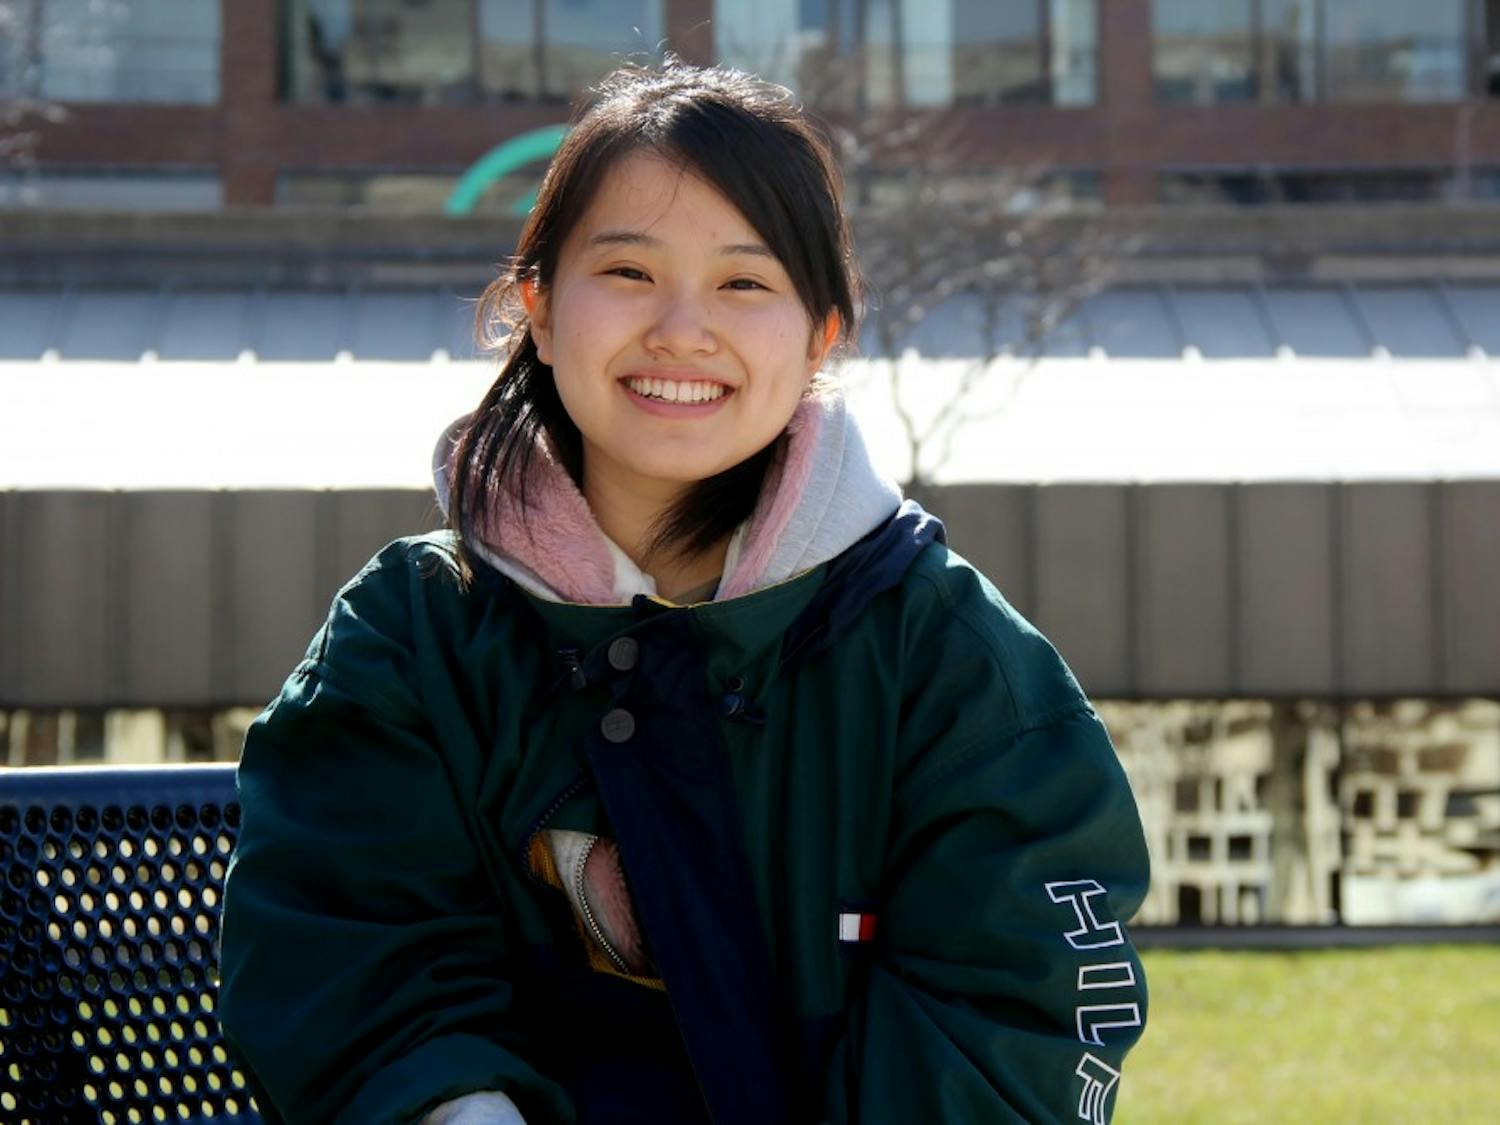 Japanese international student Elle Machomoto says that one of the biggest differences between how Japanese and Americans date is public displays of affection. While Americans express affection openly with their partners, Japanese couples keep their relationships more private.